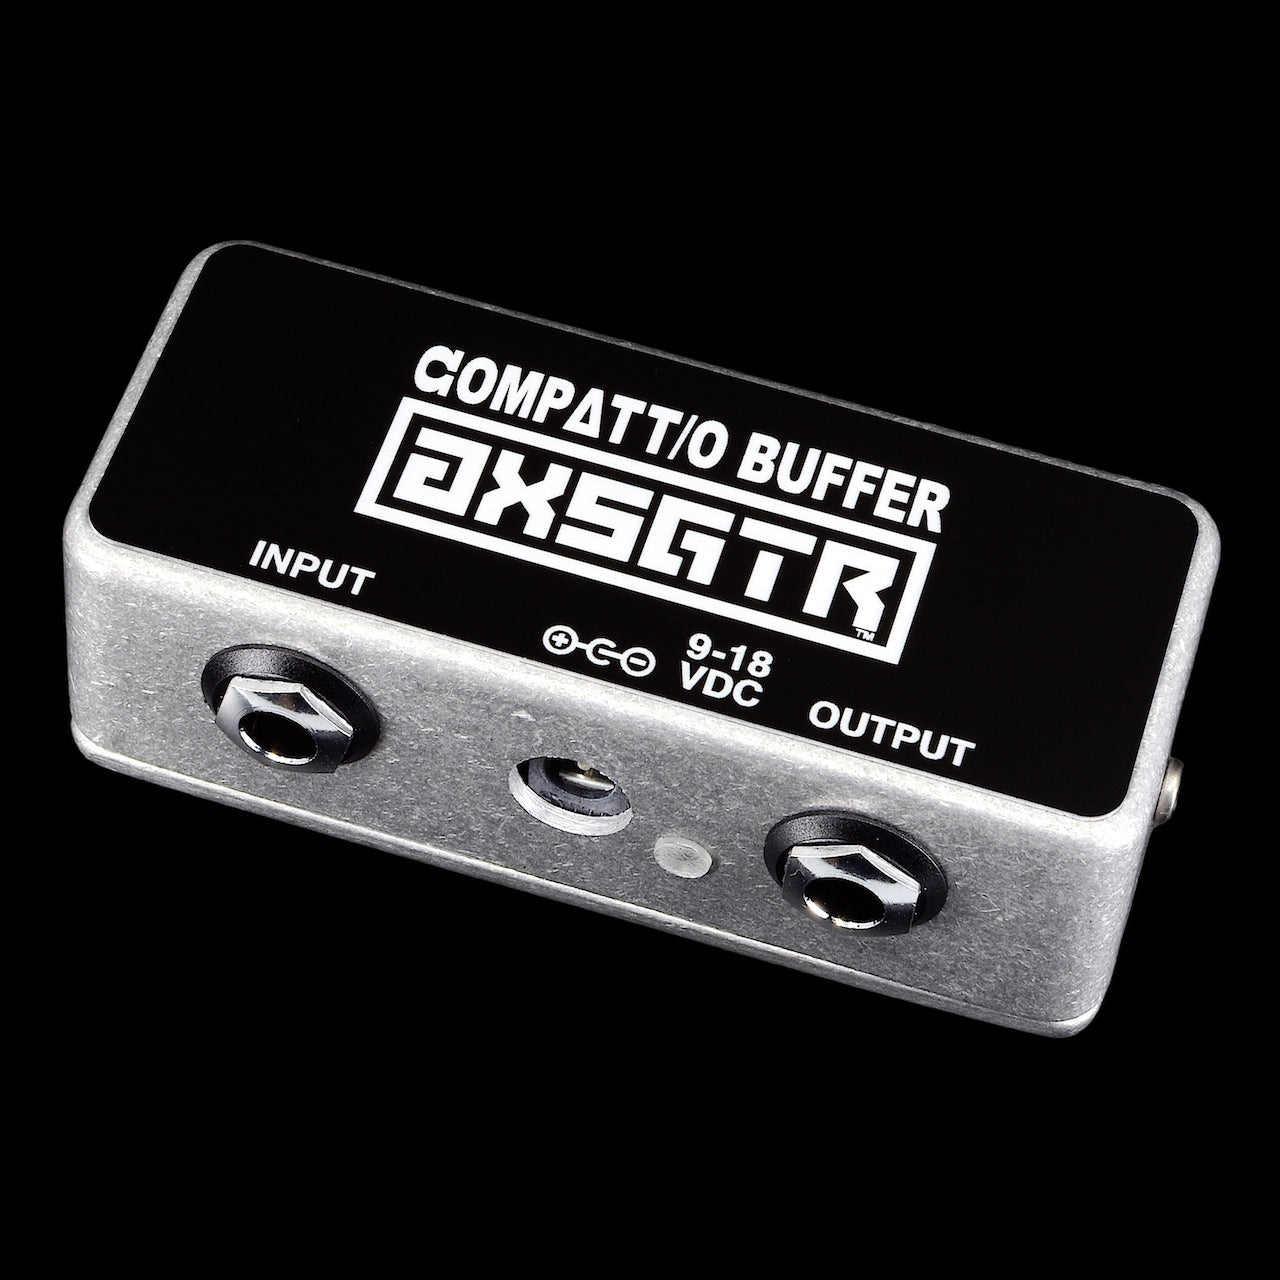 axsgtr axess electronics cpto compatto guitar input output buffer line driver right side angled black